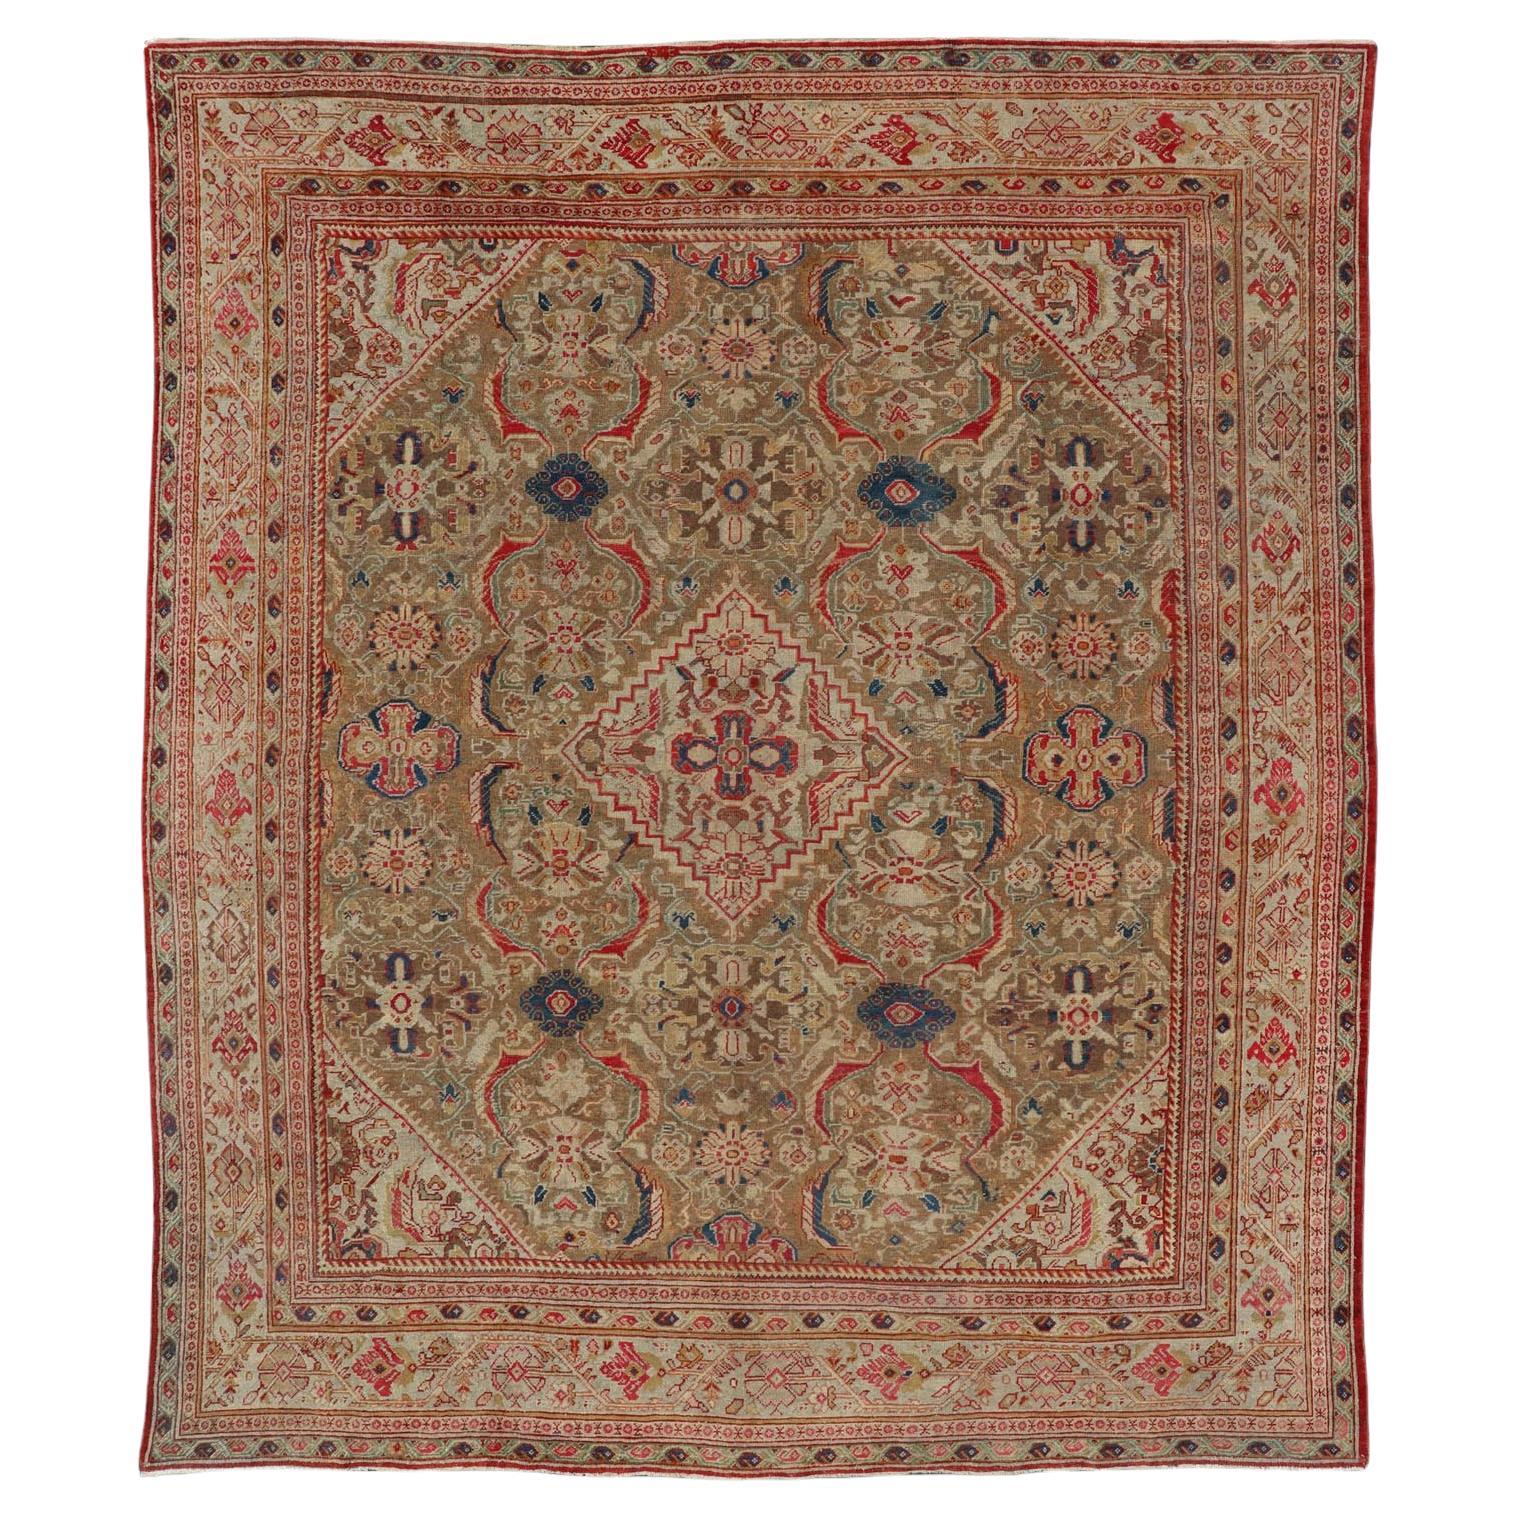 Antique Persian Sultanabad Carpet with Geometric Design In Green, Blue and Red